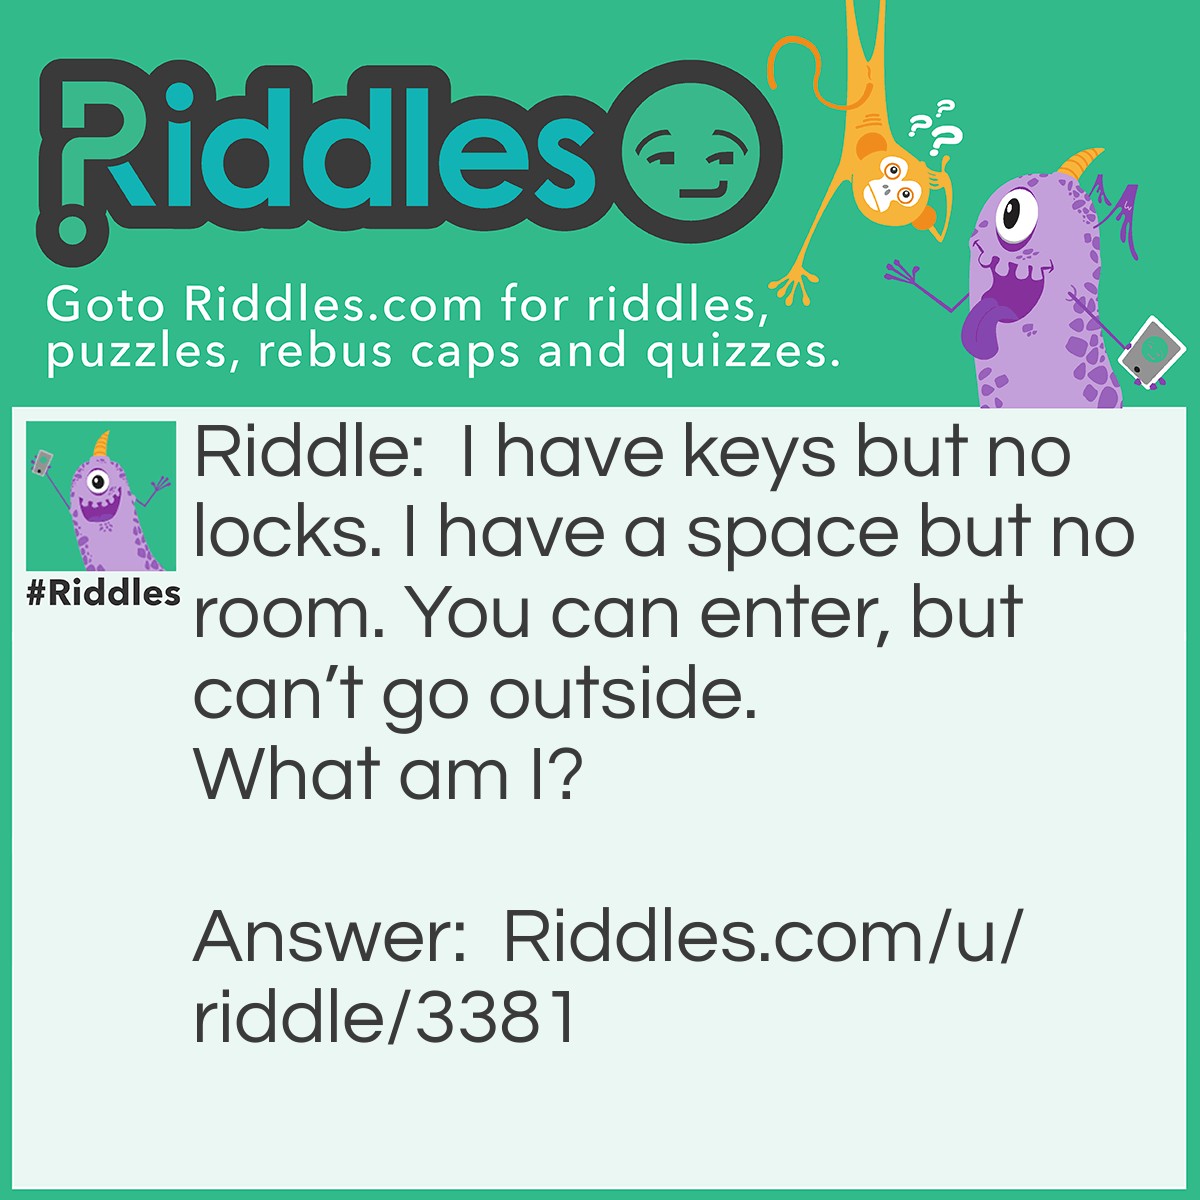 Riddle: I have keys but no locks. I have a space but no room. You can enter, but can't go outside. What am I? Answer: I am a keyboard.